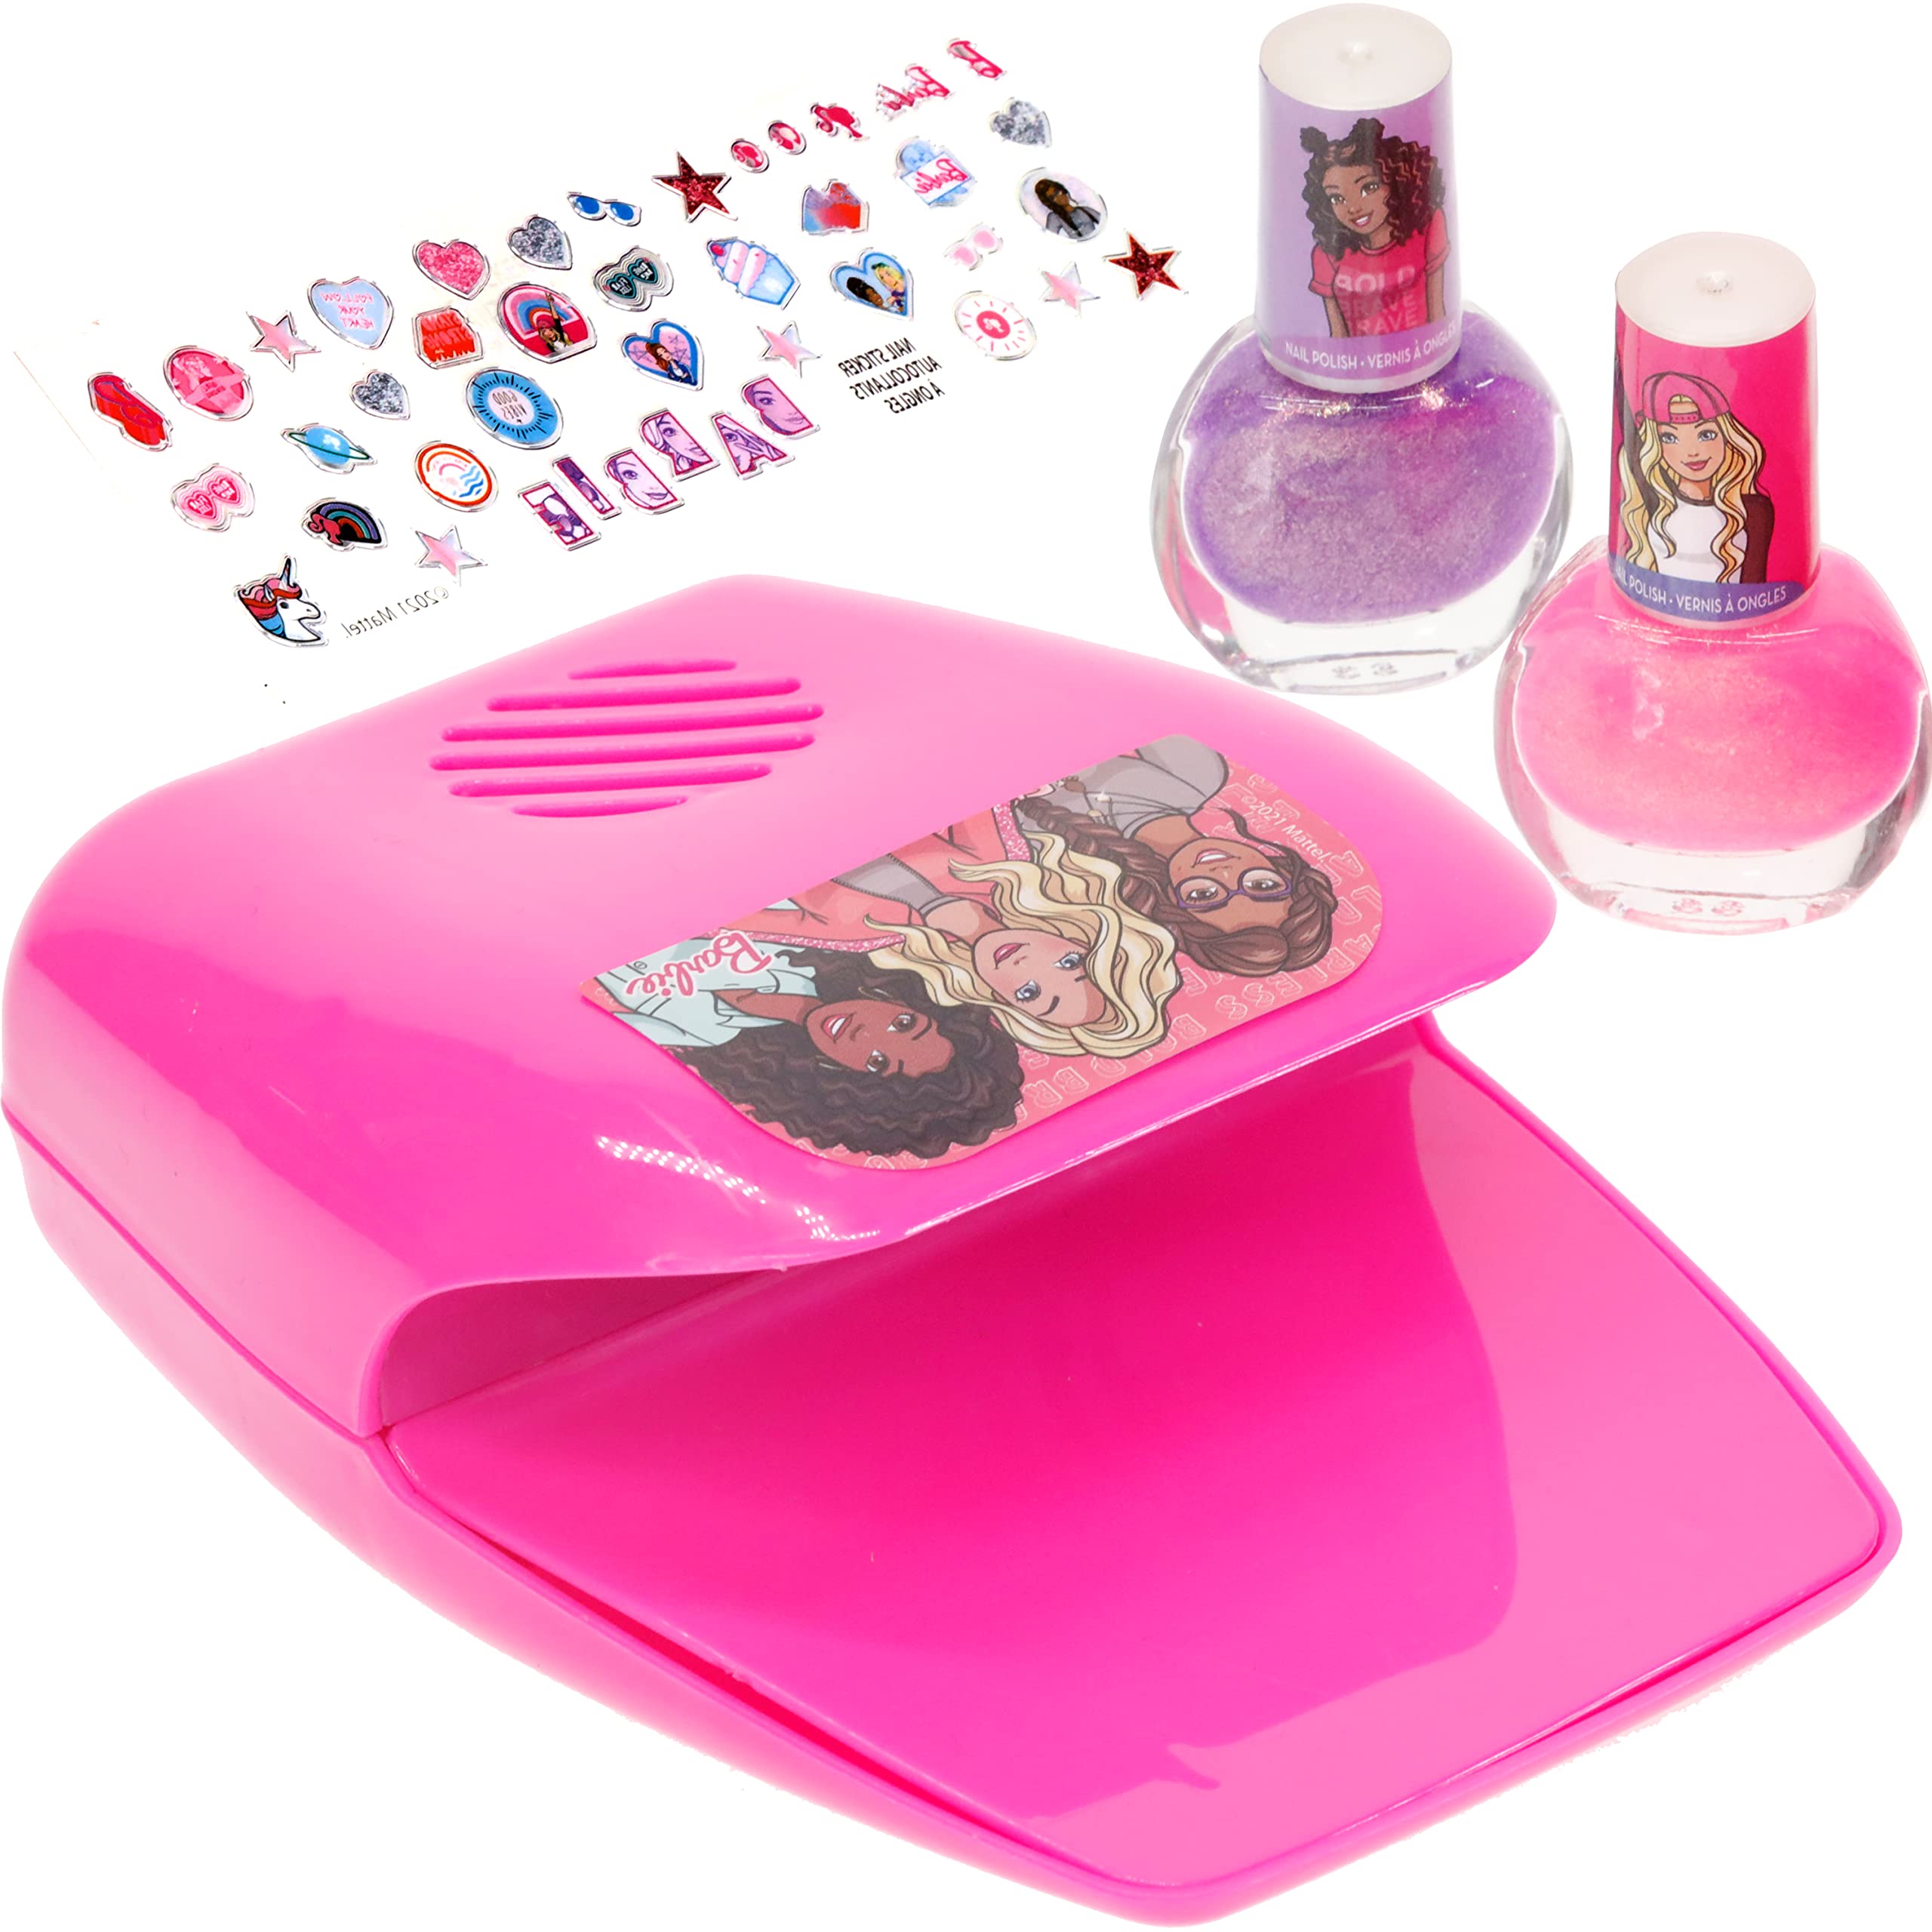 Townley Girl Barbie Non-Toxic Peel-Off Nail Polish Set with Nail Dryer for Girls, Batteries Not Included, Ages 3+